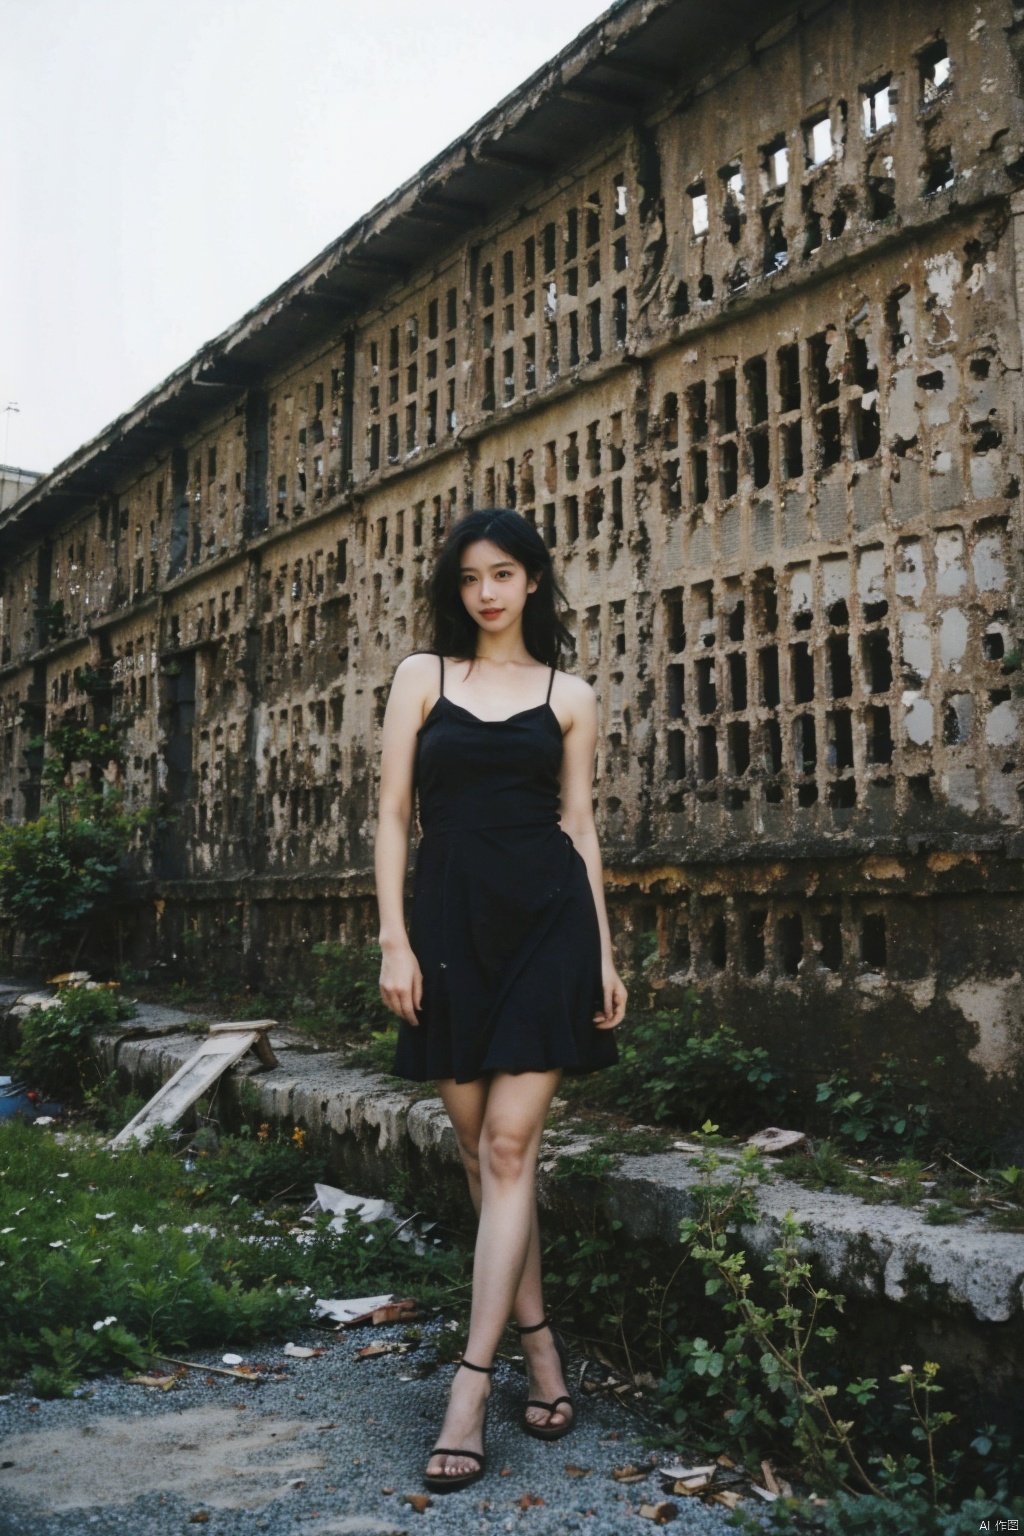 vivid, high contrast, urban-meets-nature scenario,
stylish and contemporary, 
a young ***** woman, 
strikingly beautiful, 
wearing a sleek, modern cocktail dress and heels,
posing confidently in an unexpected environment - 
an abandoned industrial site reclaimed by nature,
with ivy crawling up concrete walls and wildflowers sprouting from cracks,
moonlit sky above casting dramatic shadows across the gritty landscape,
yet her presence commands attention amidst the chaos,
holding a delicate bouquet of flowers as a symbol of life's resilience,
her gaze confrontational yet alluring, 
blending sophistication with raw, untamed beauty., Postwar ruins